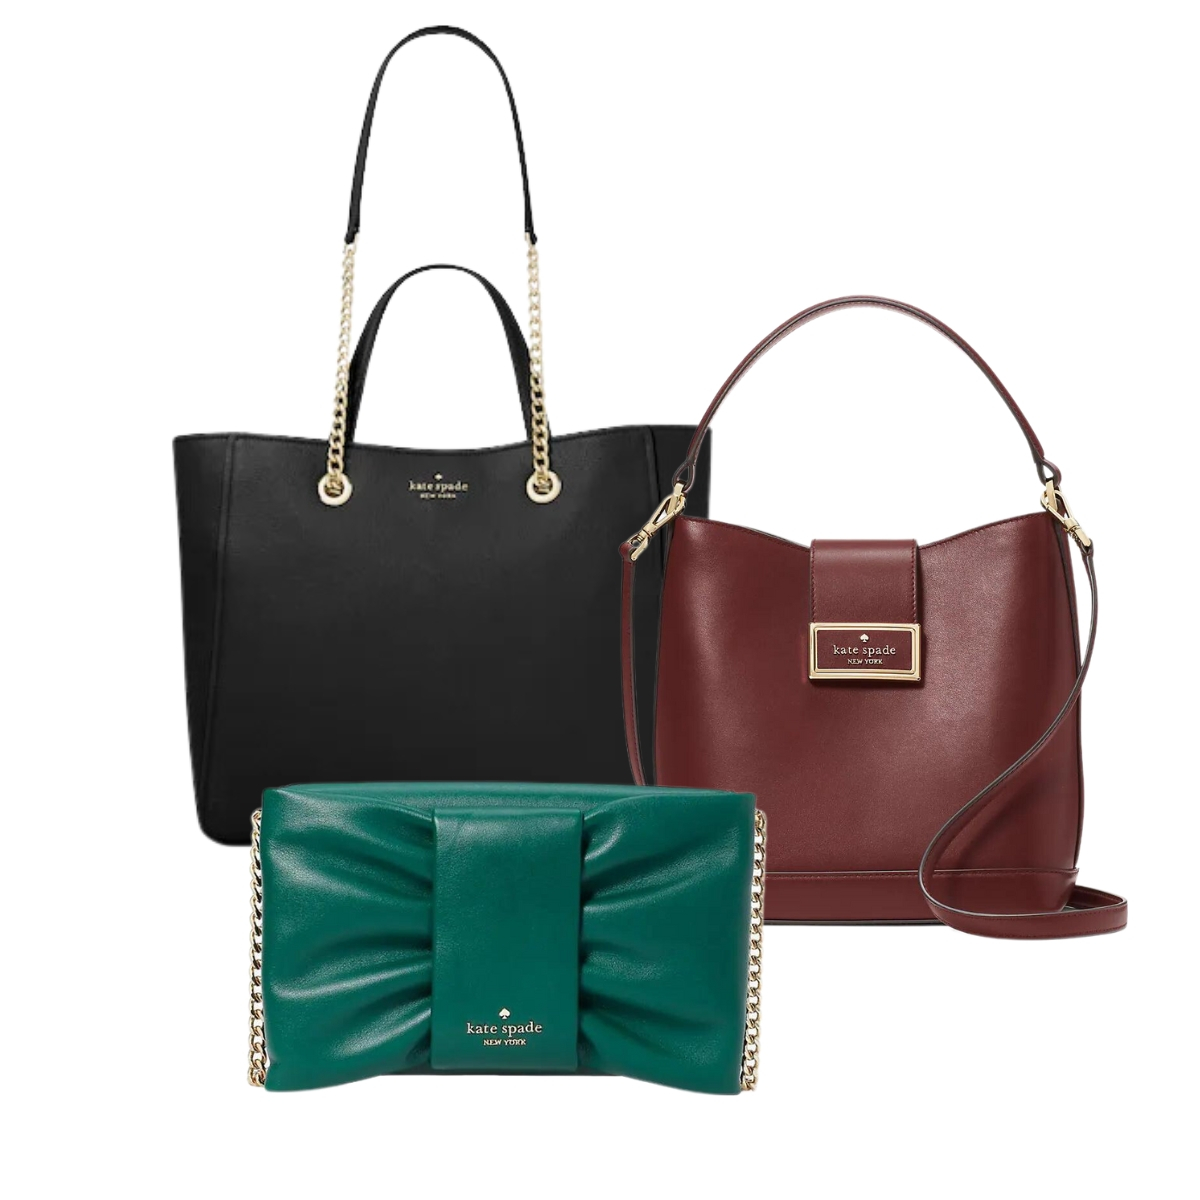 Kate Spade Surprise sale: Up to 70% off bags, wallets, accessories, more 